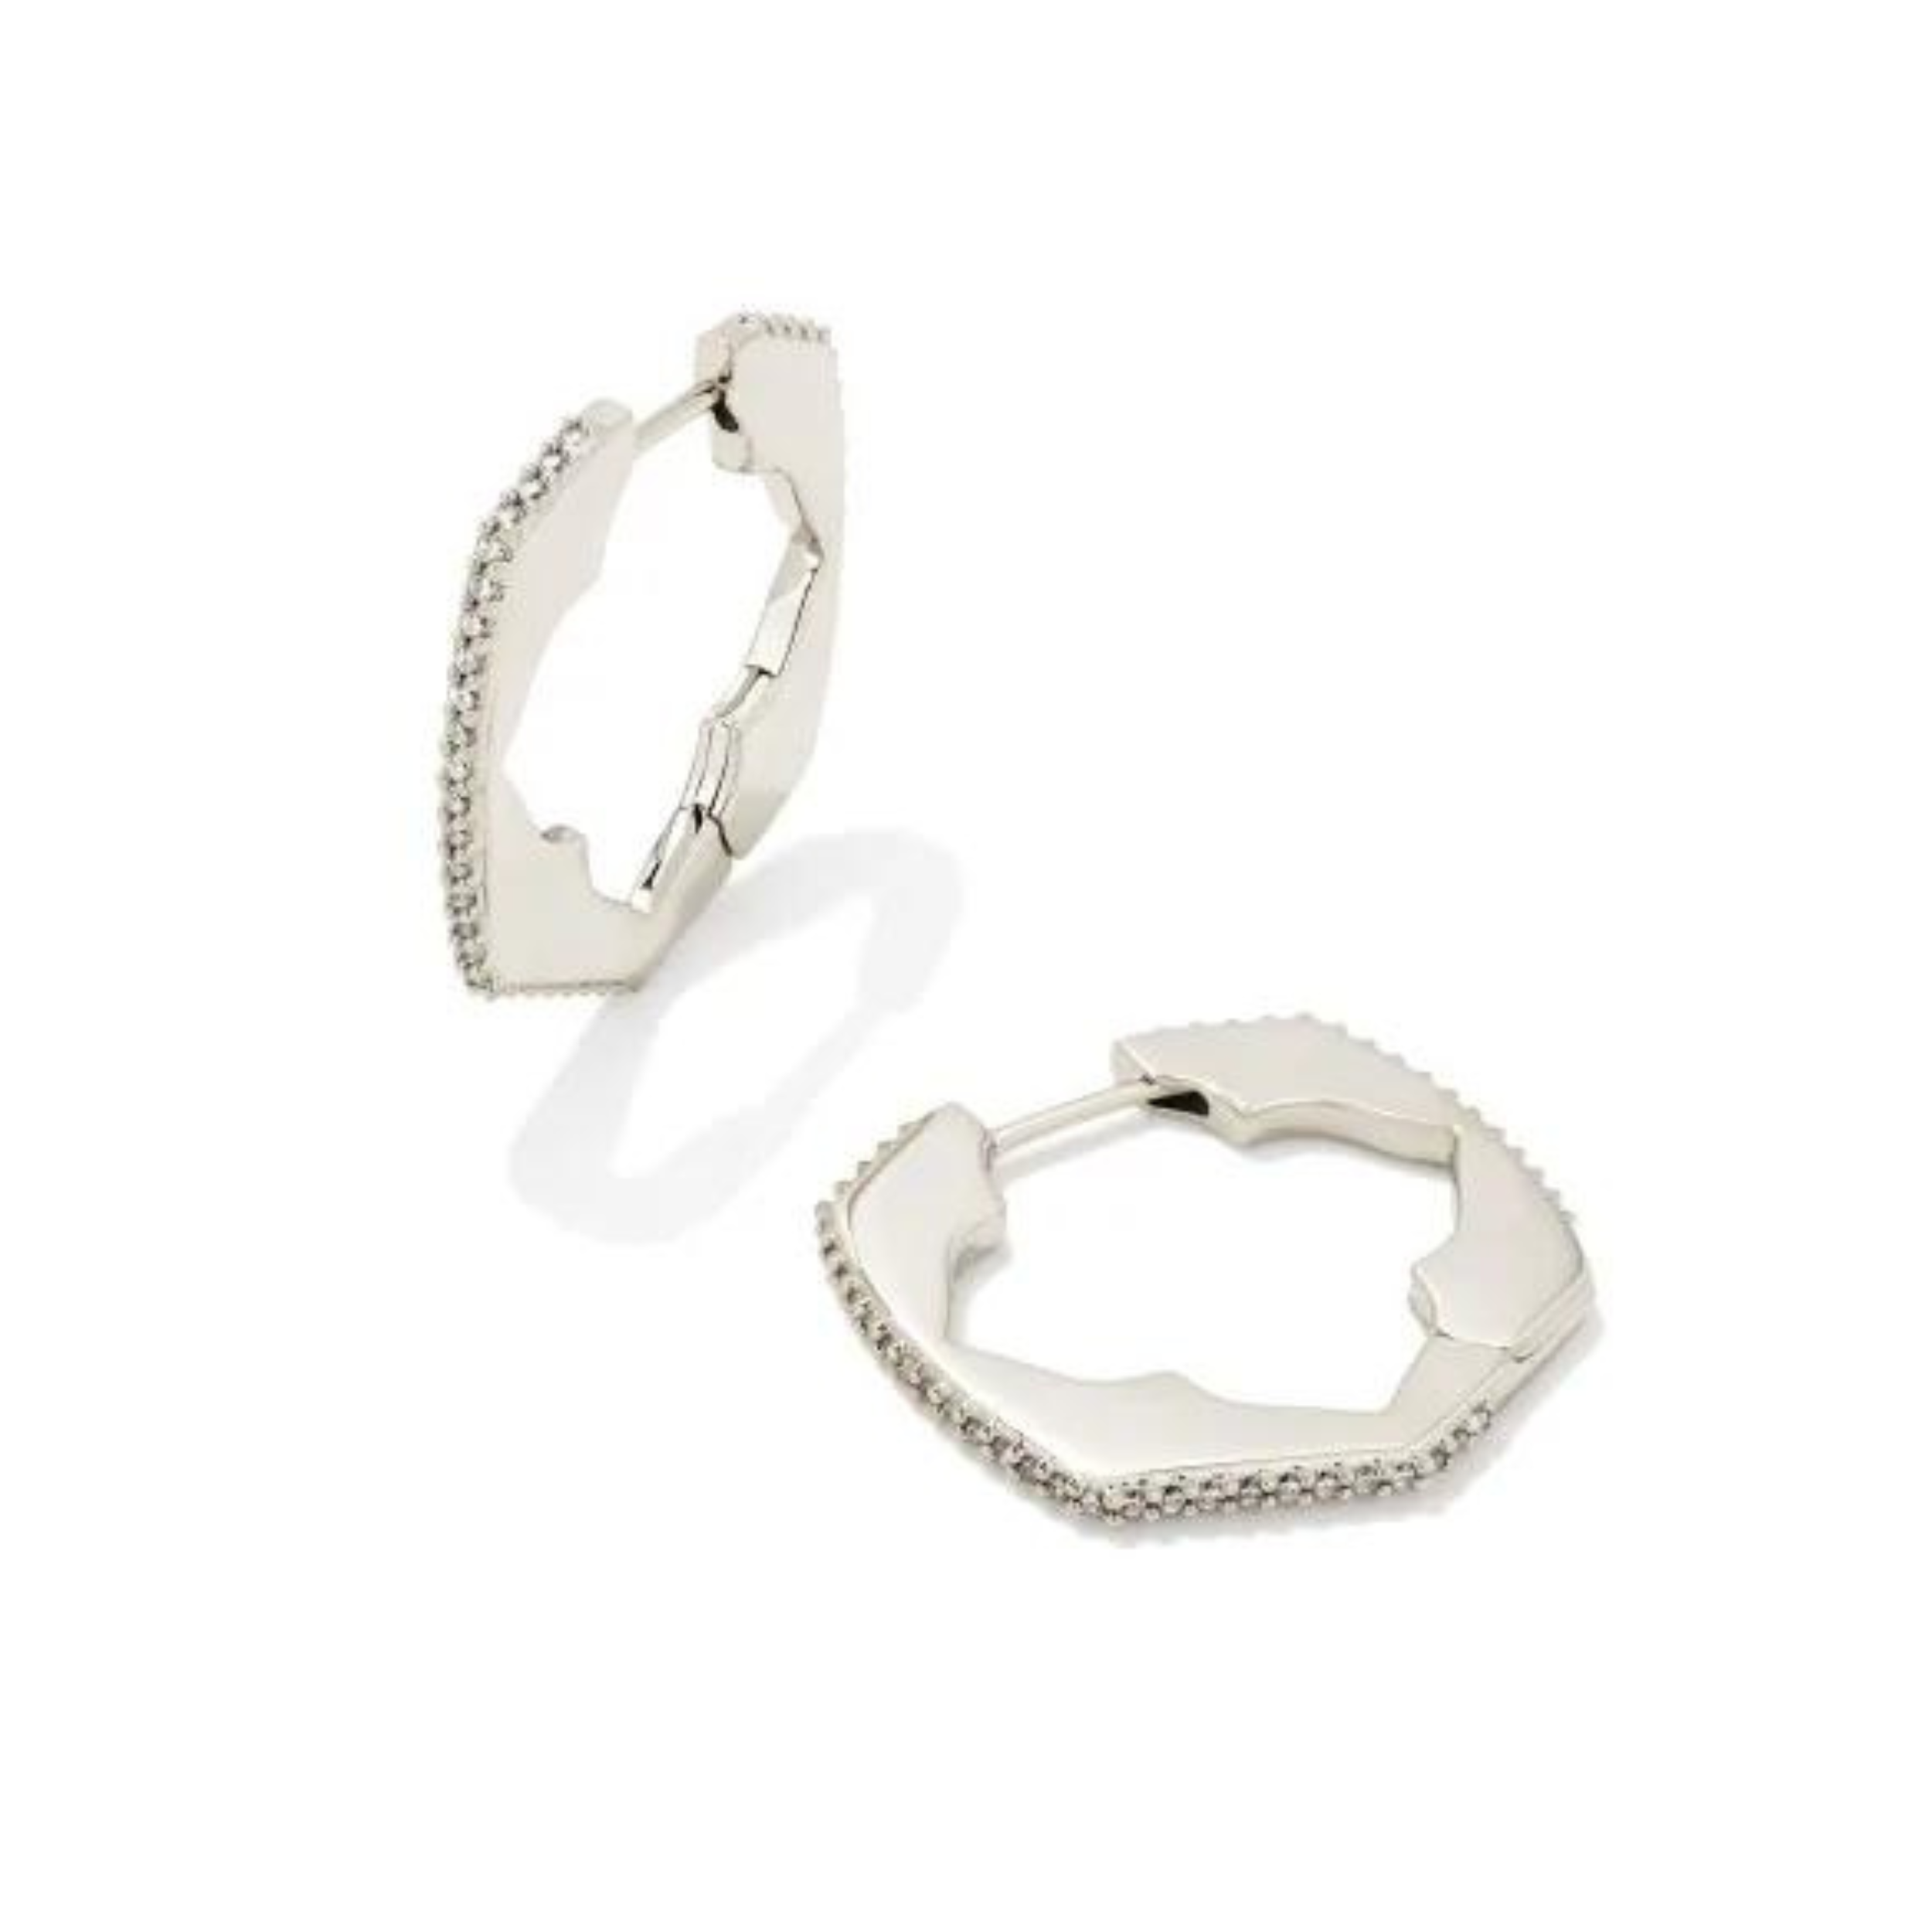 Silver huggie hoop earrings with Kendra Scott logo cut out surrounded by white crystals pictured on a white background.